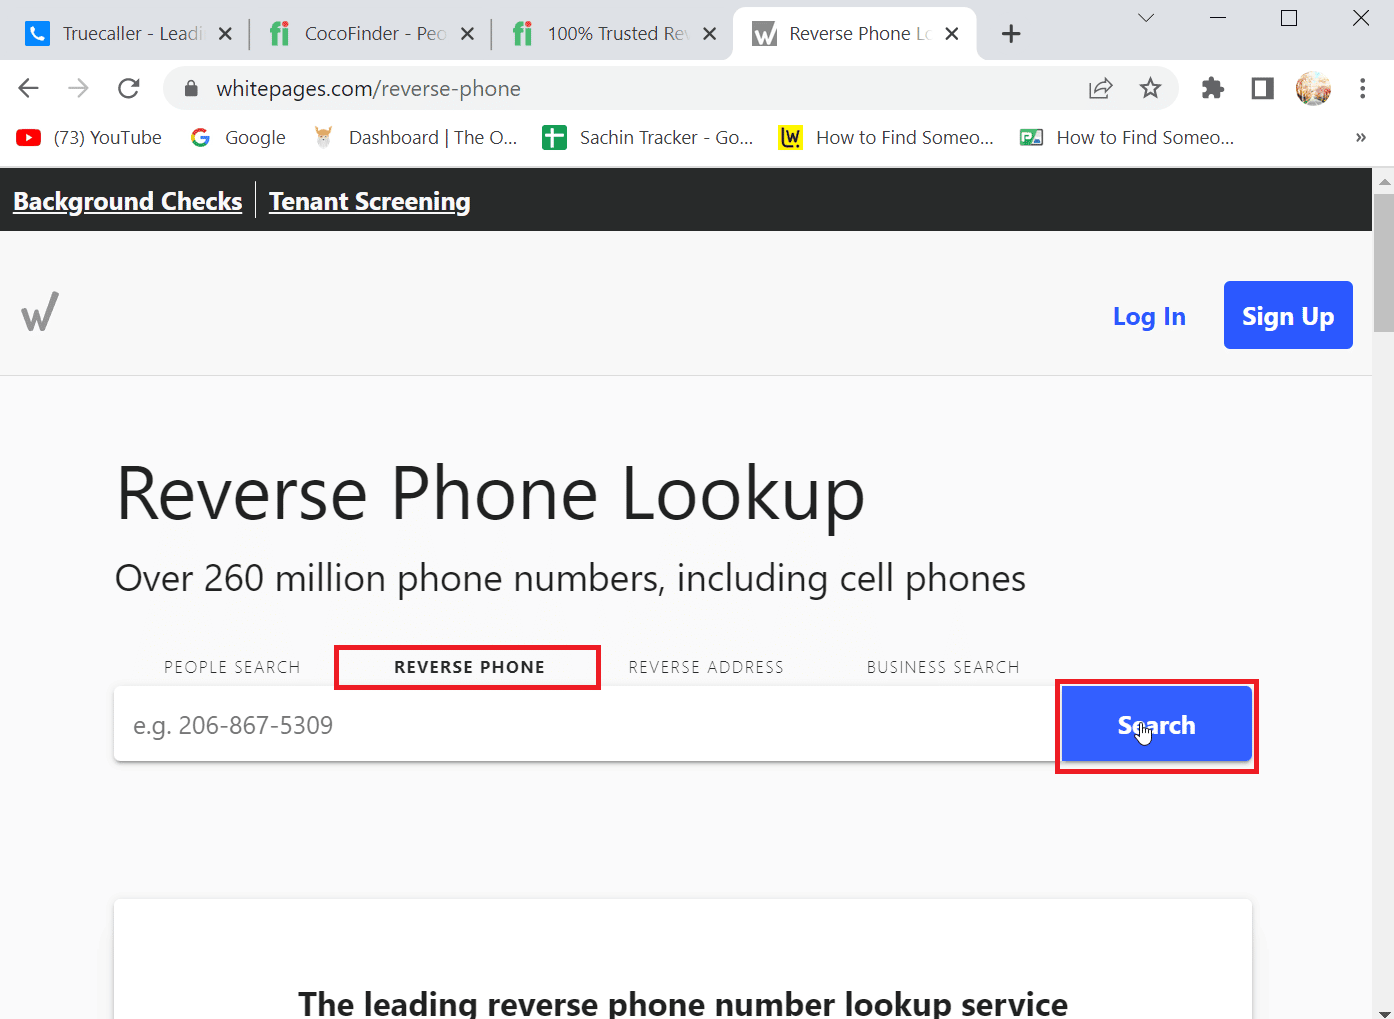 click reverse phone enter the number and click search